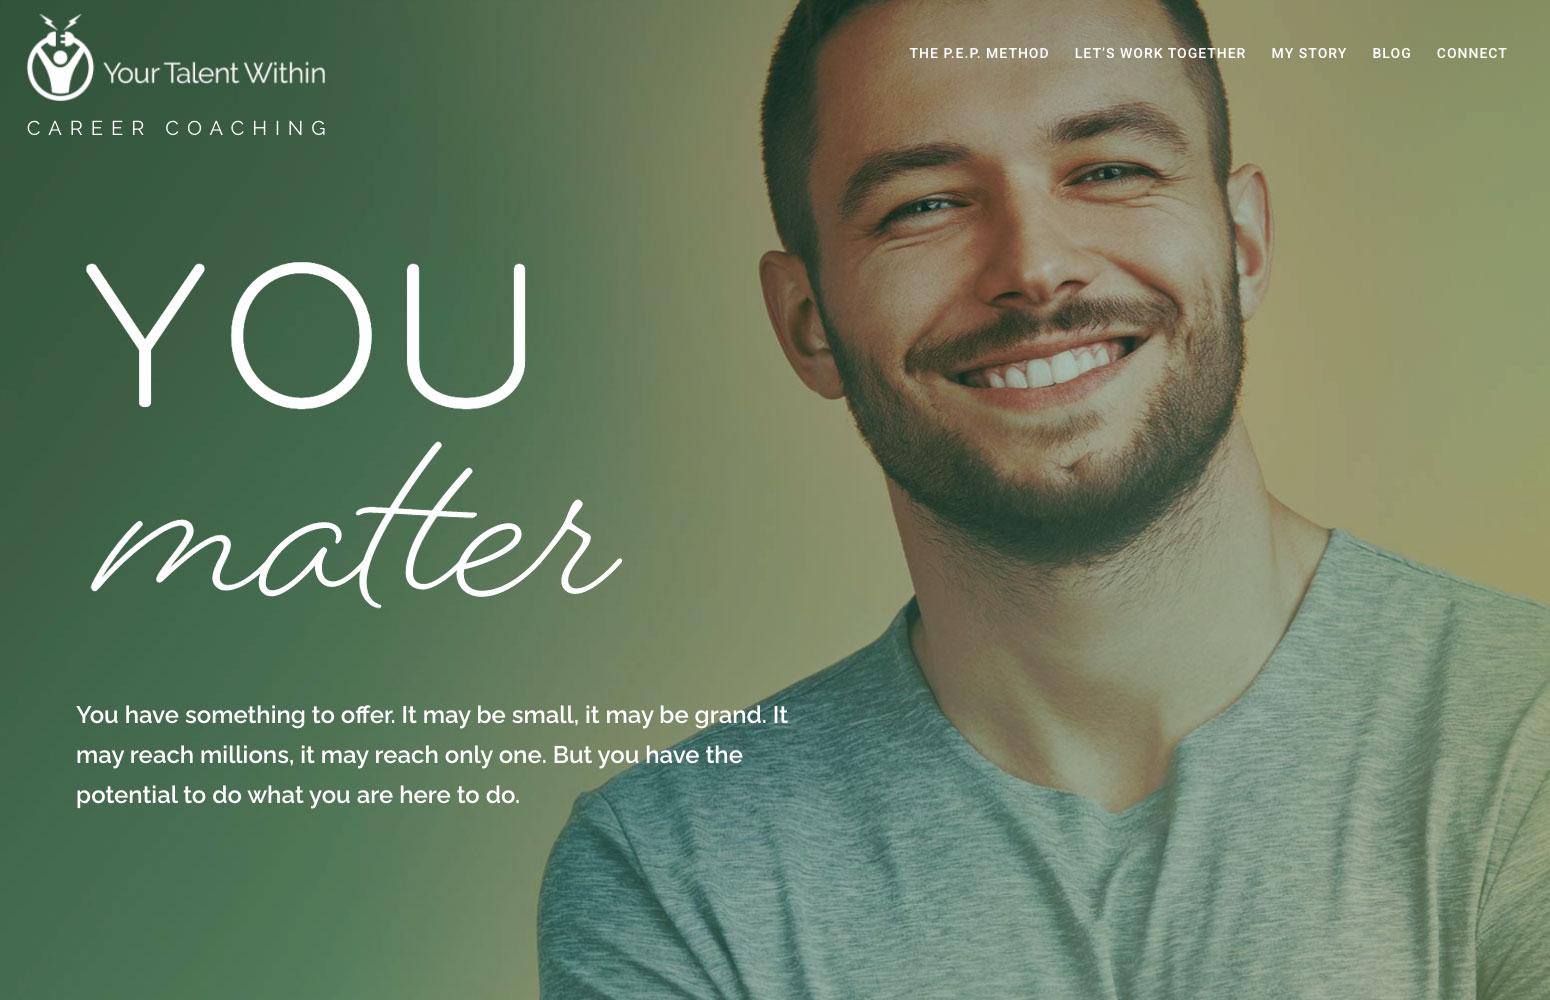 your-talent-within-wordpress-website-smiling-man